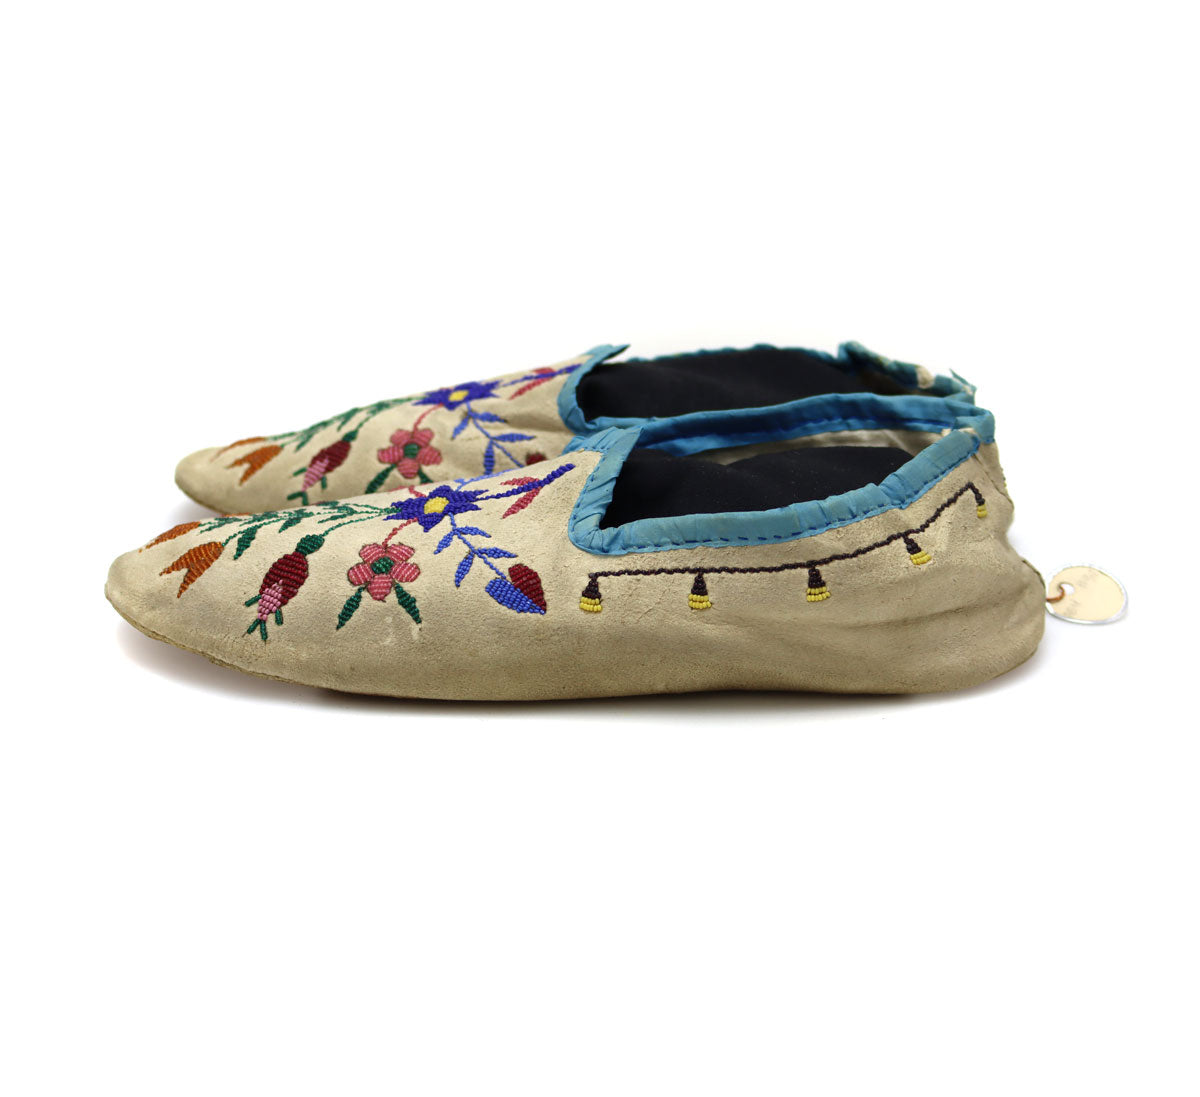 Chippewa Leather Beaded Moccasins with Floral Design c. 1880s, 2.25" x 10" x 14" (DW92323A-0421-016) 2
